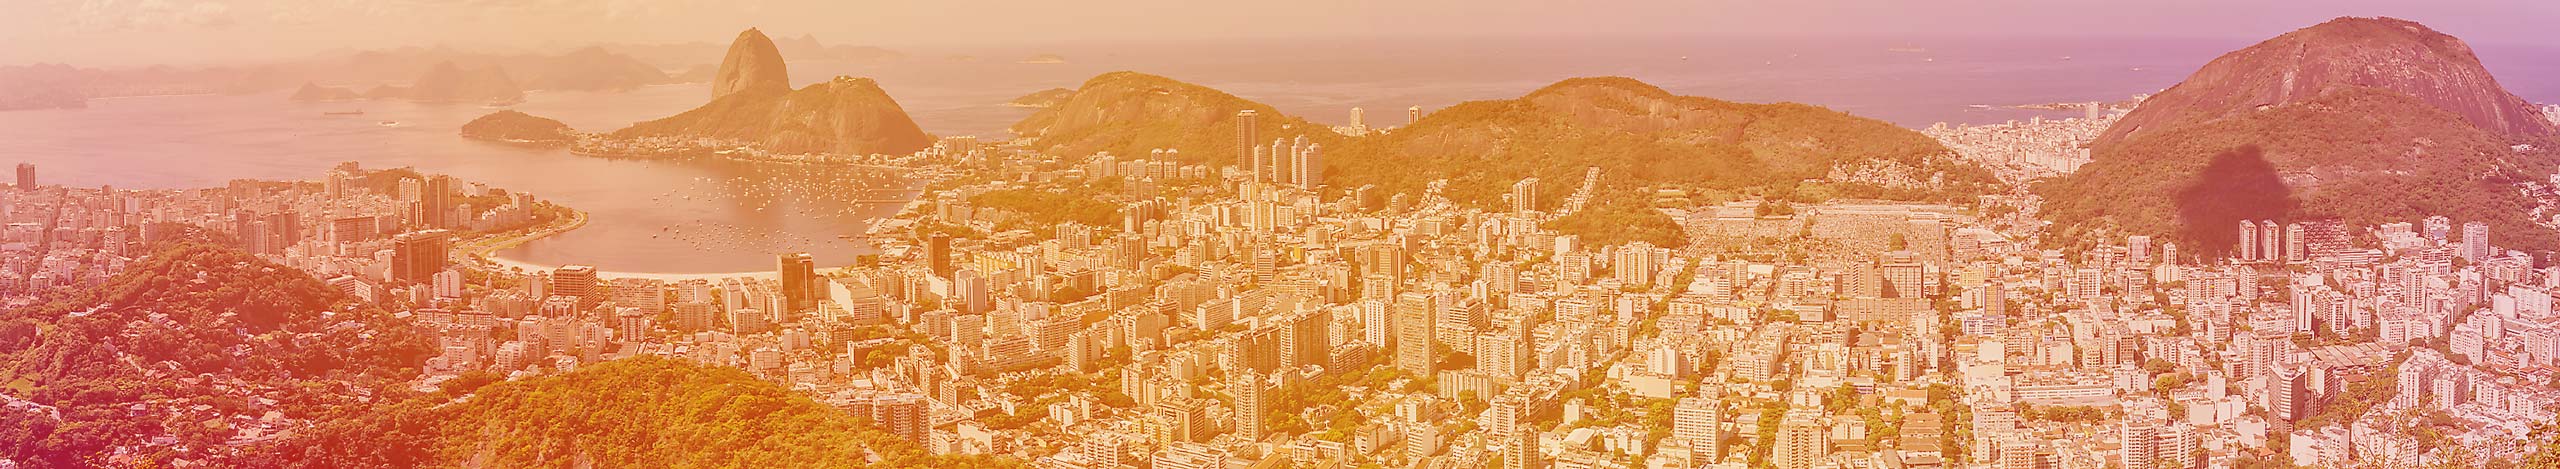 About chat apps in Rio de Janeiro